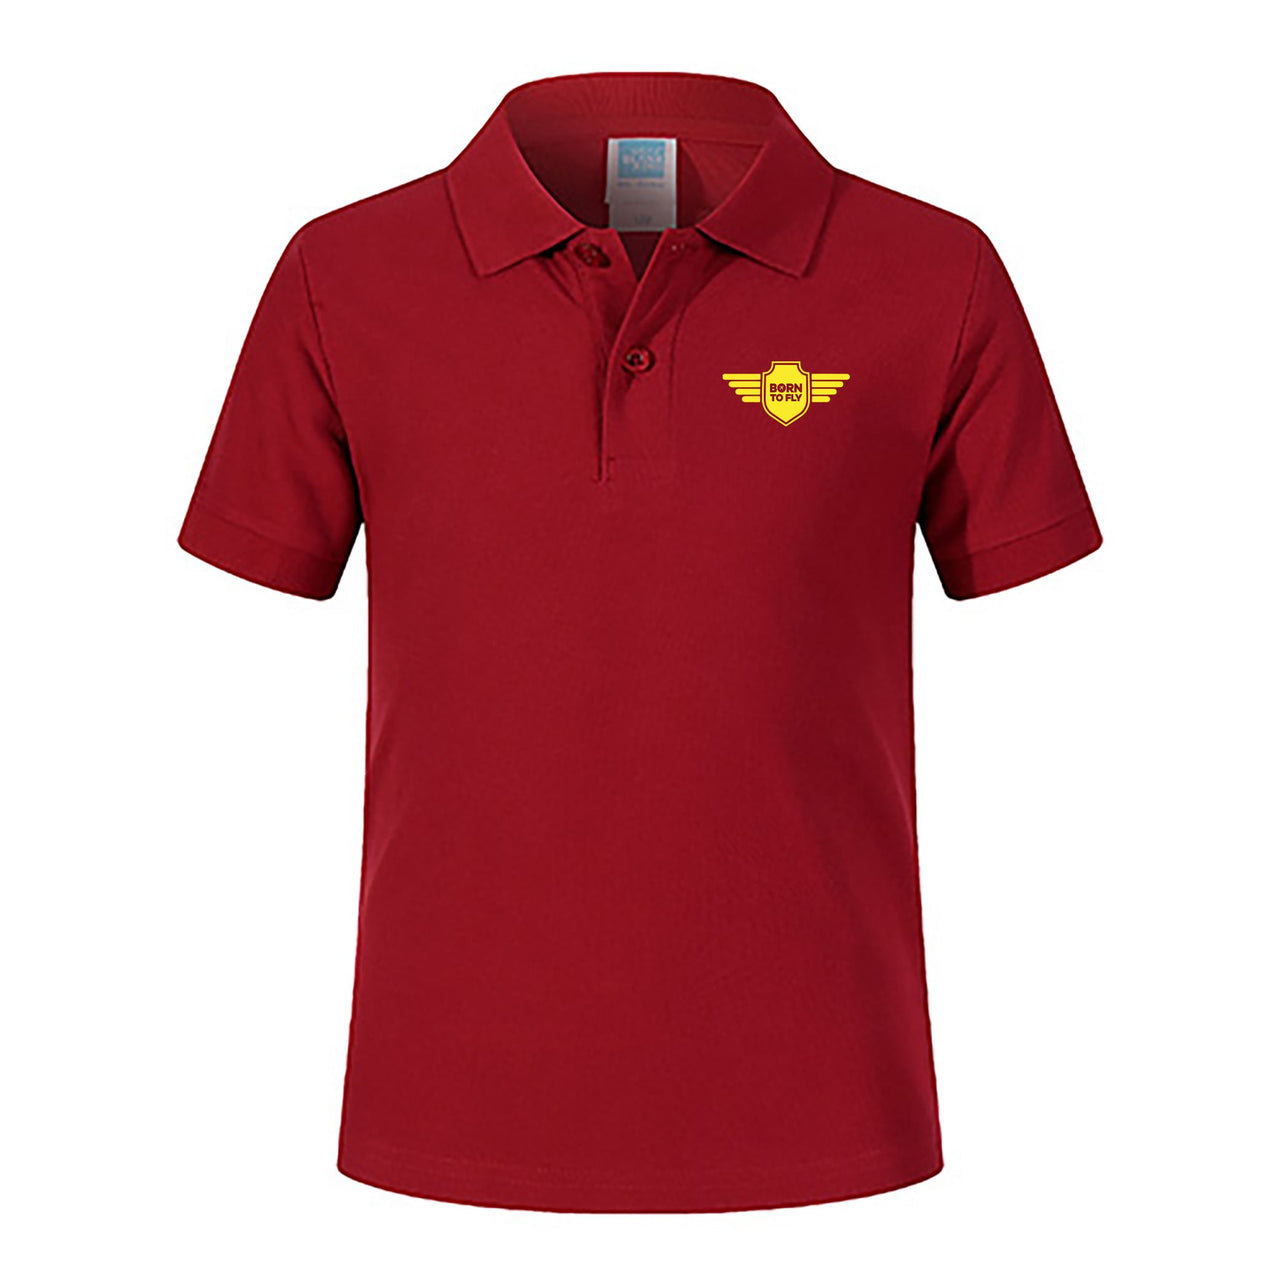 Born To Fly & Badge Designed Children Polo T-Shirts